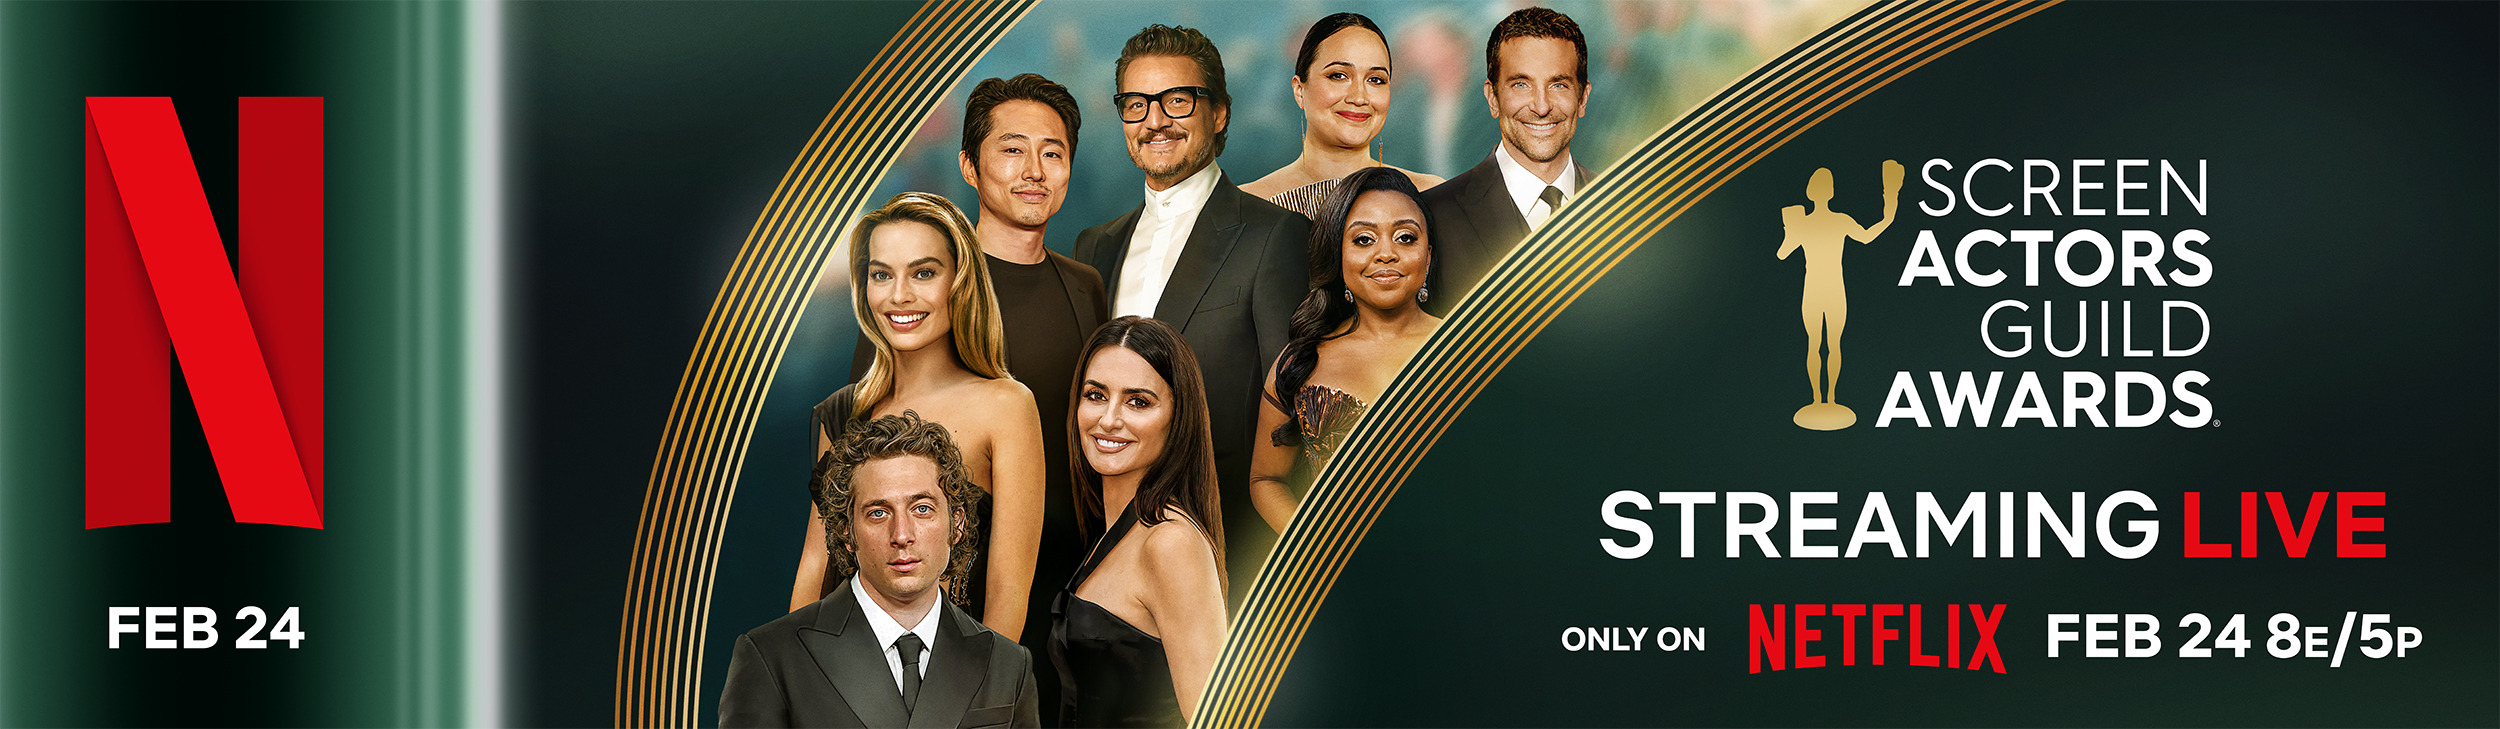 Mega Sized TV Poster Image for Screen Actors Guild Awards (#5 of 5)